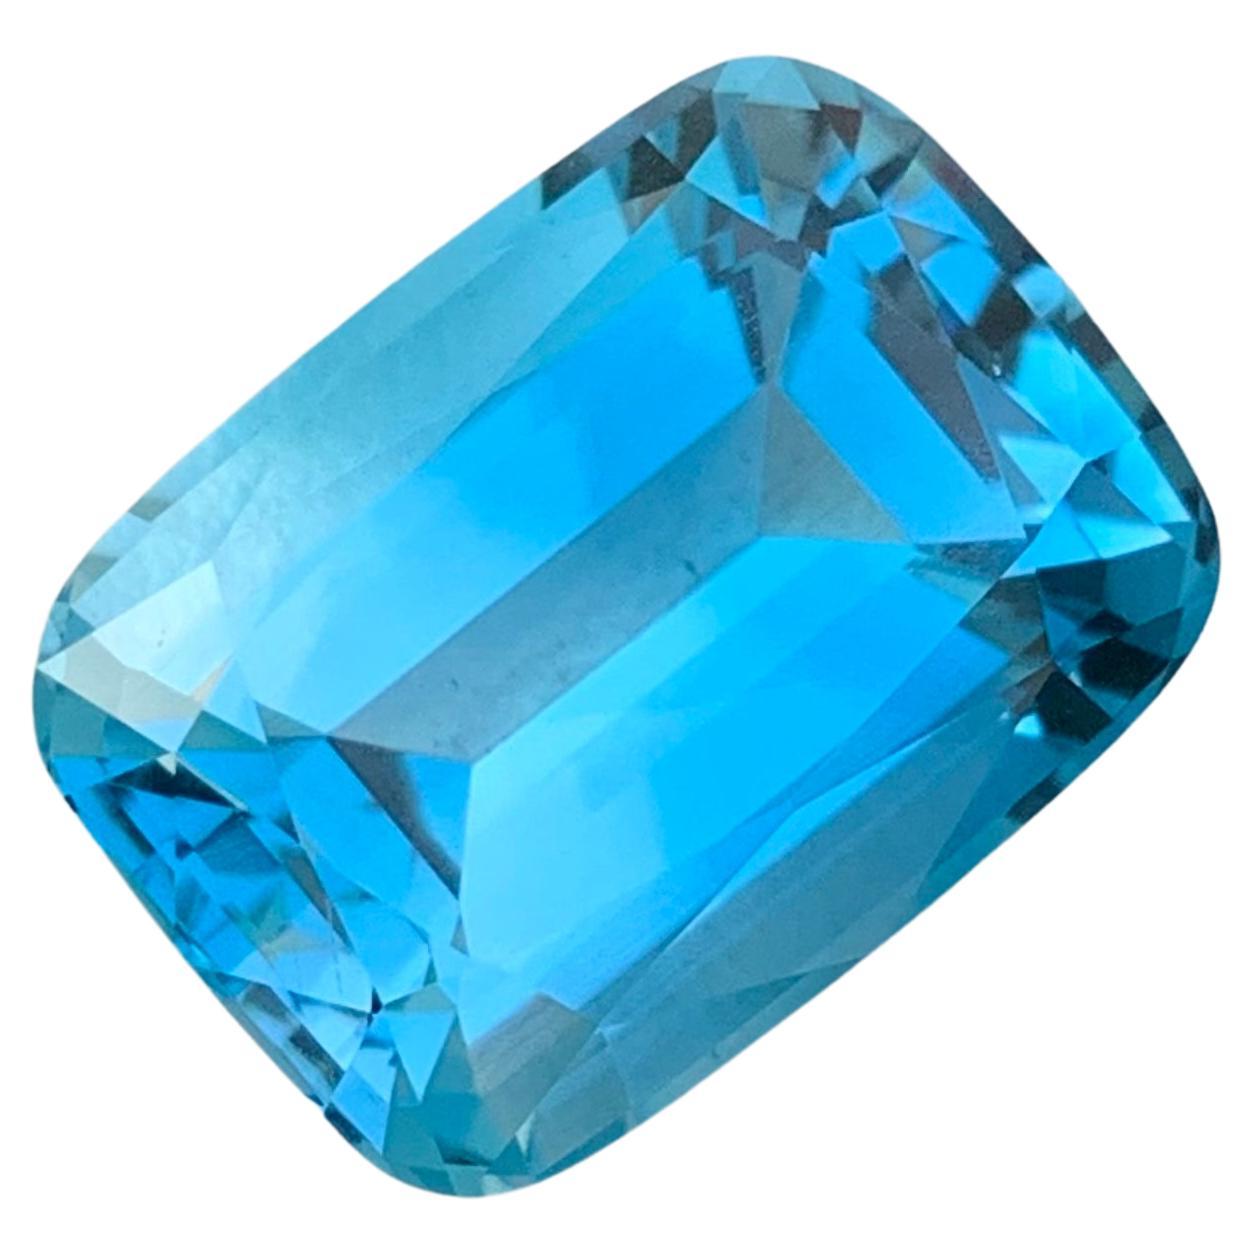 Gorgeous 14.95 Cts Faceted Blue Topaz Gemstone Long Cushion Cut From Brazil Mine